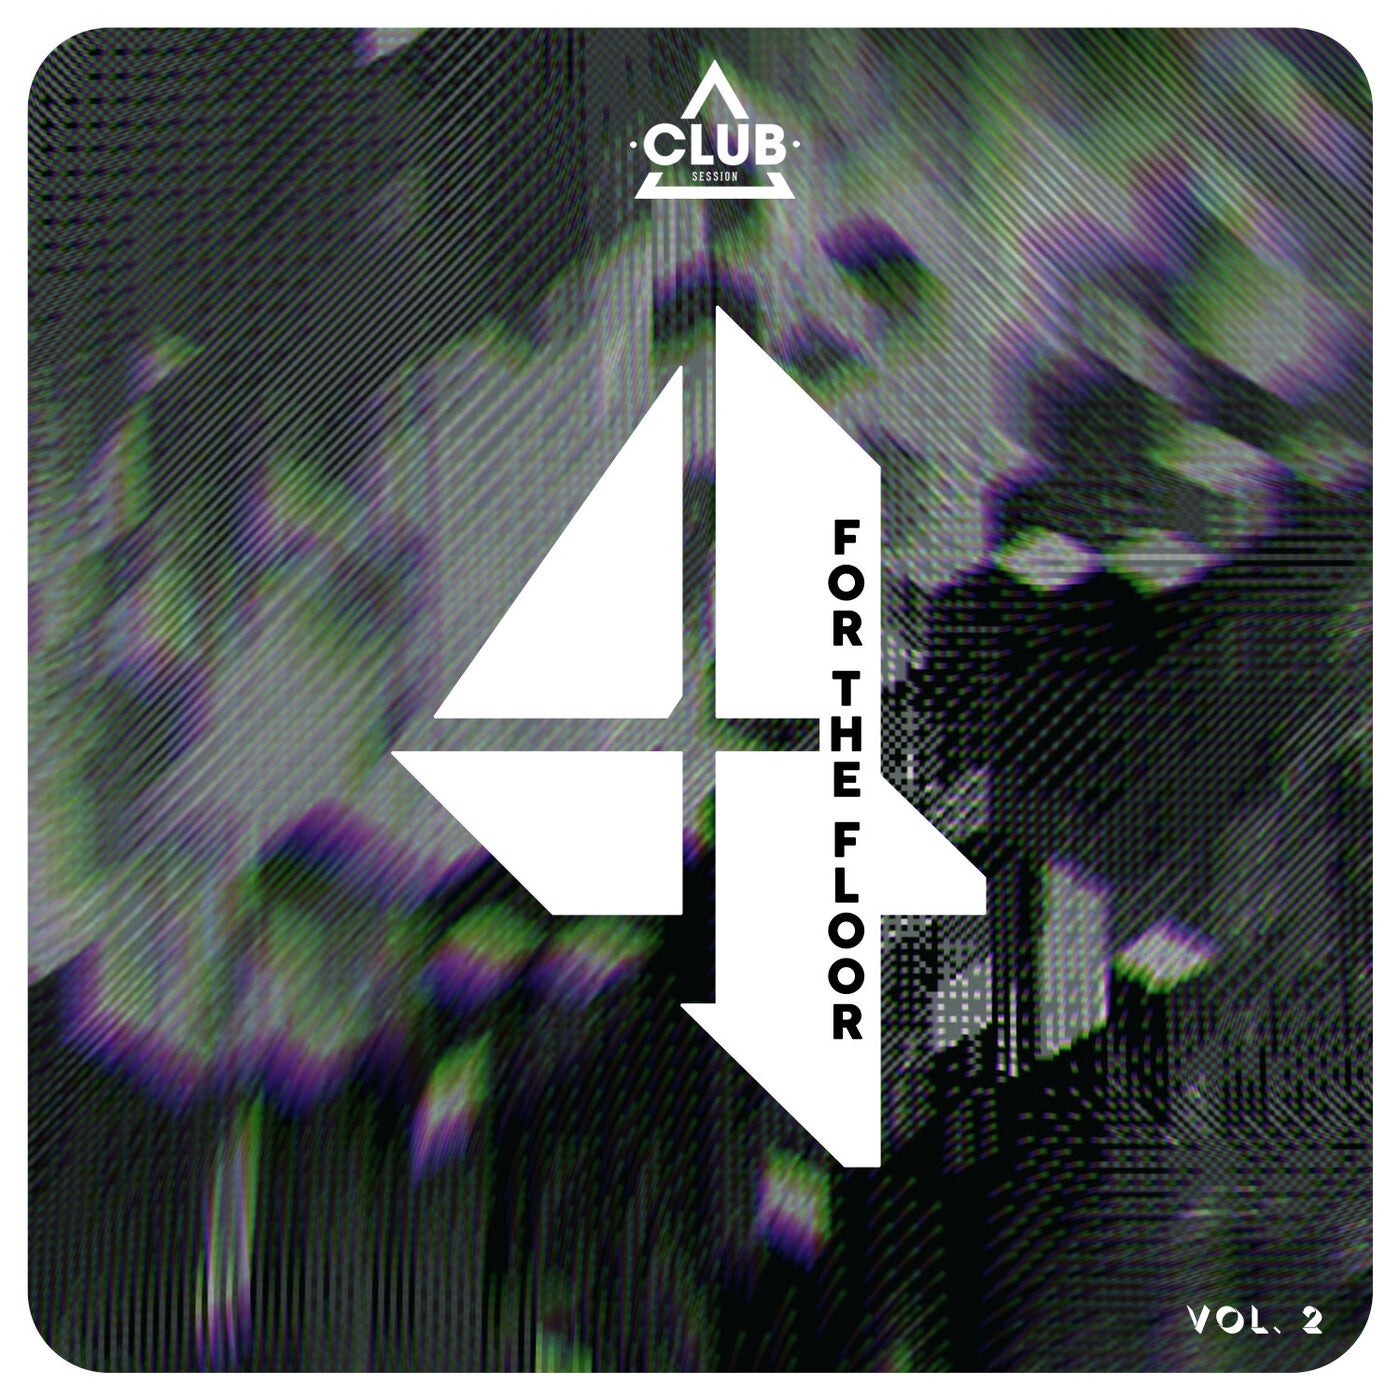 Club Session pres. 4 For The Floor Vol. 2